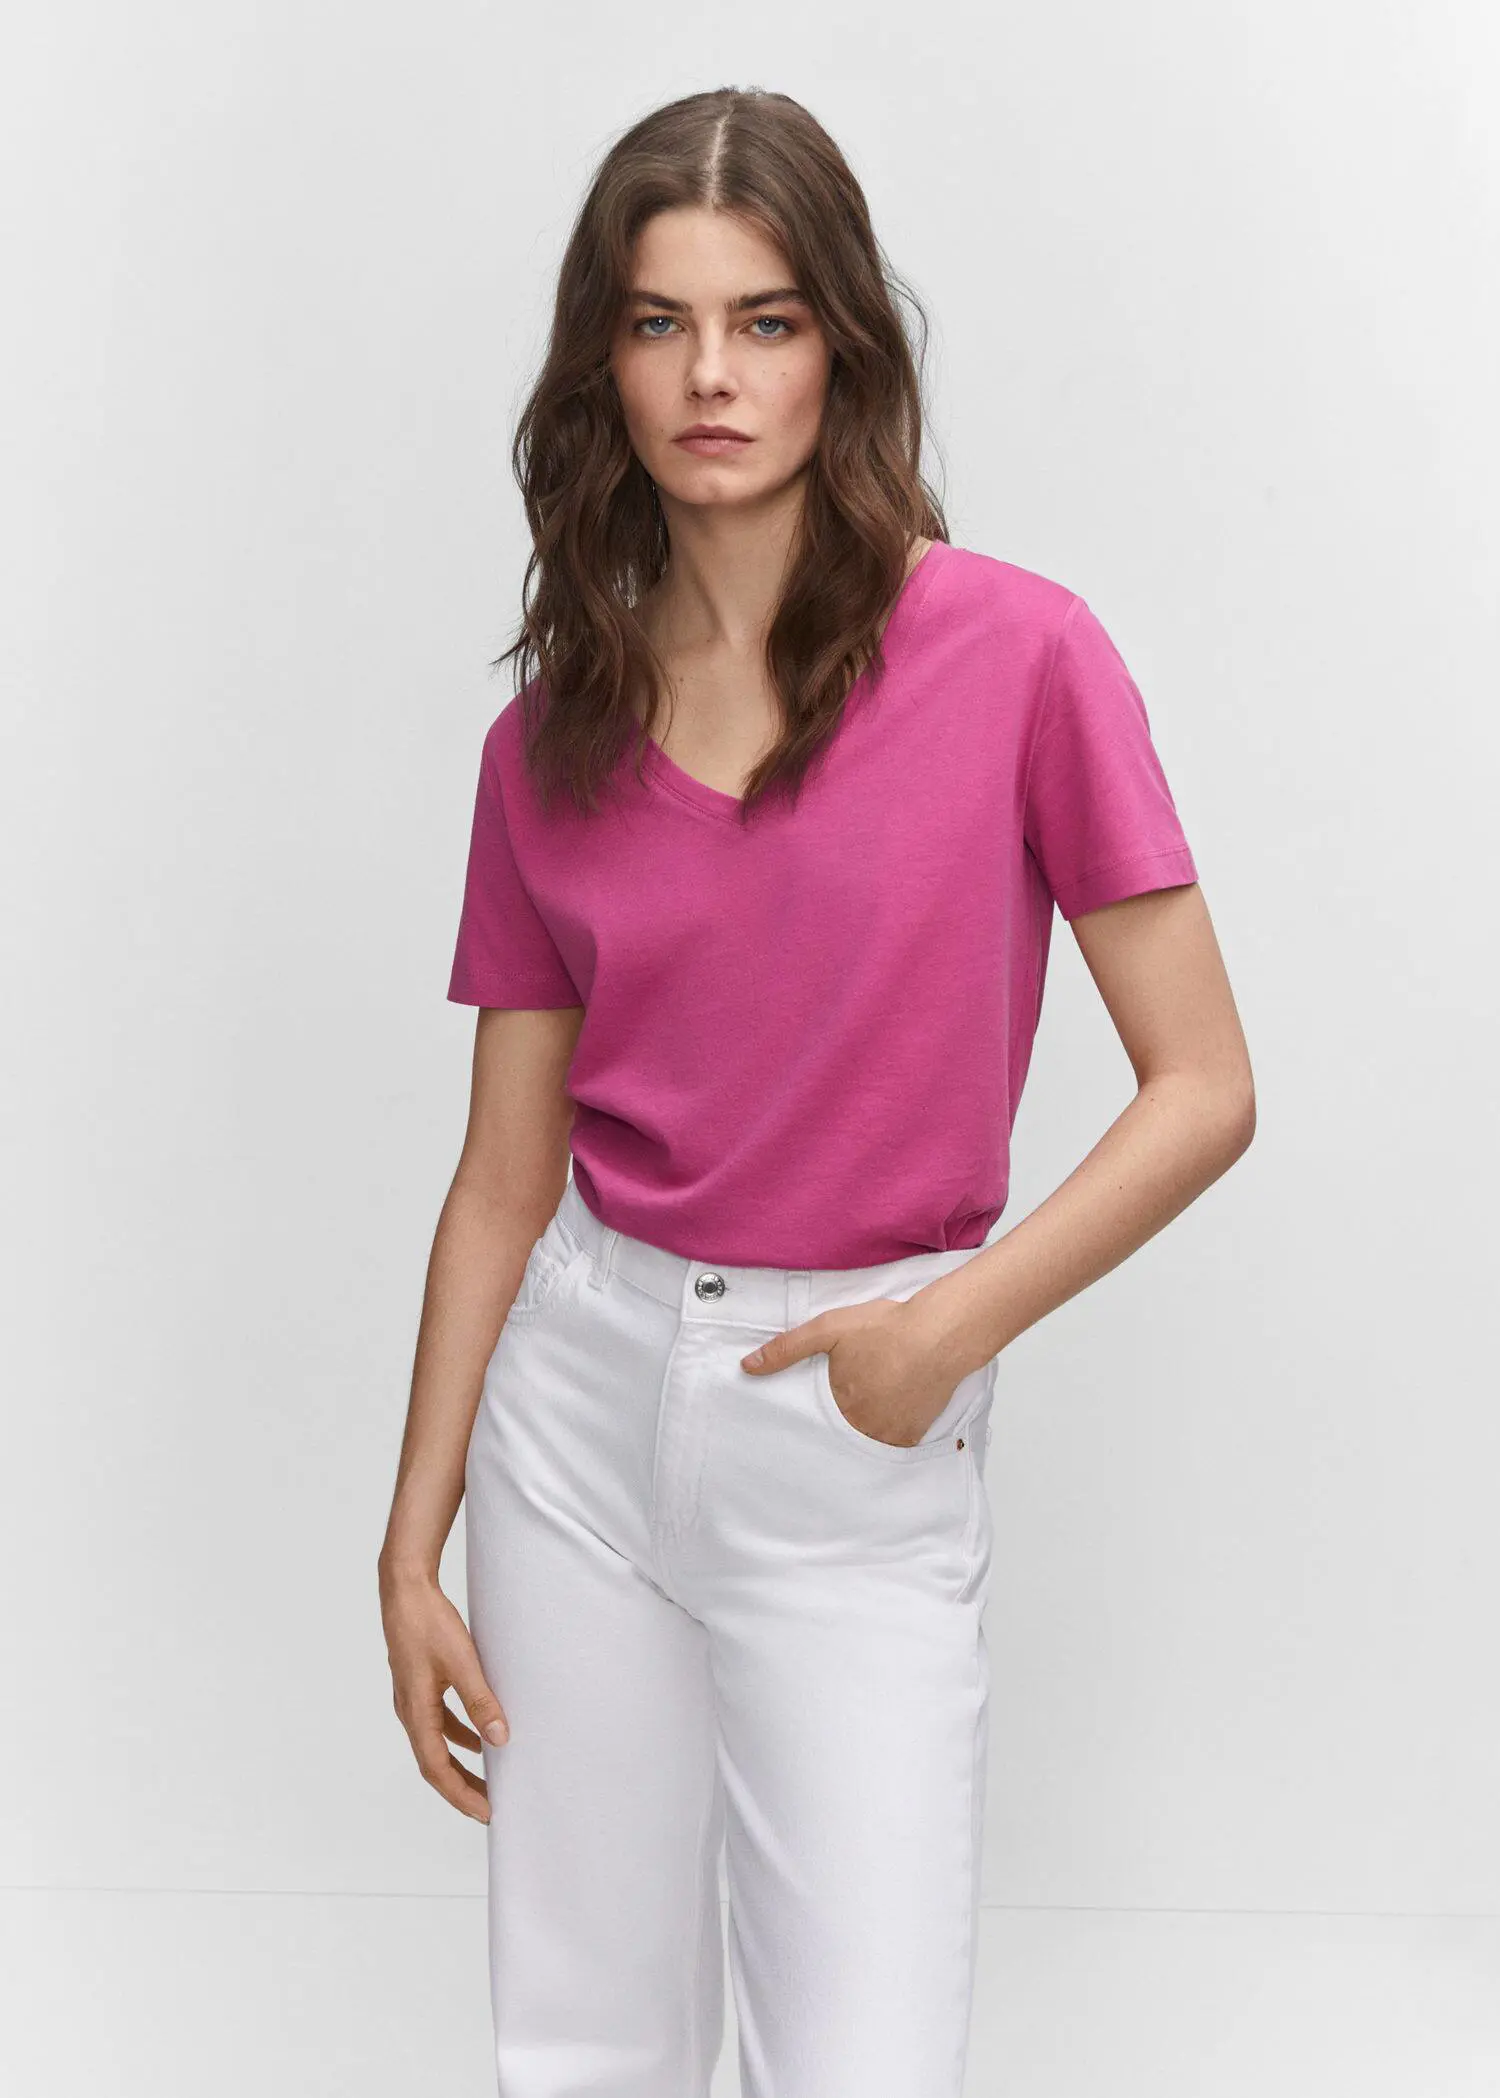 Mango V-neck cotton T-shirt. a woman wearing white pants and a pink top. 